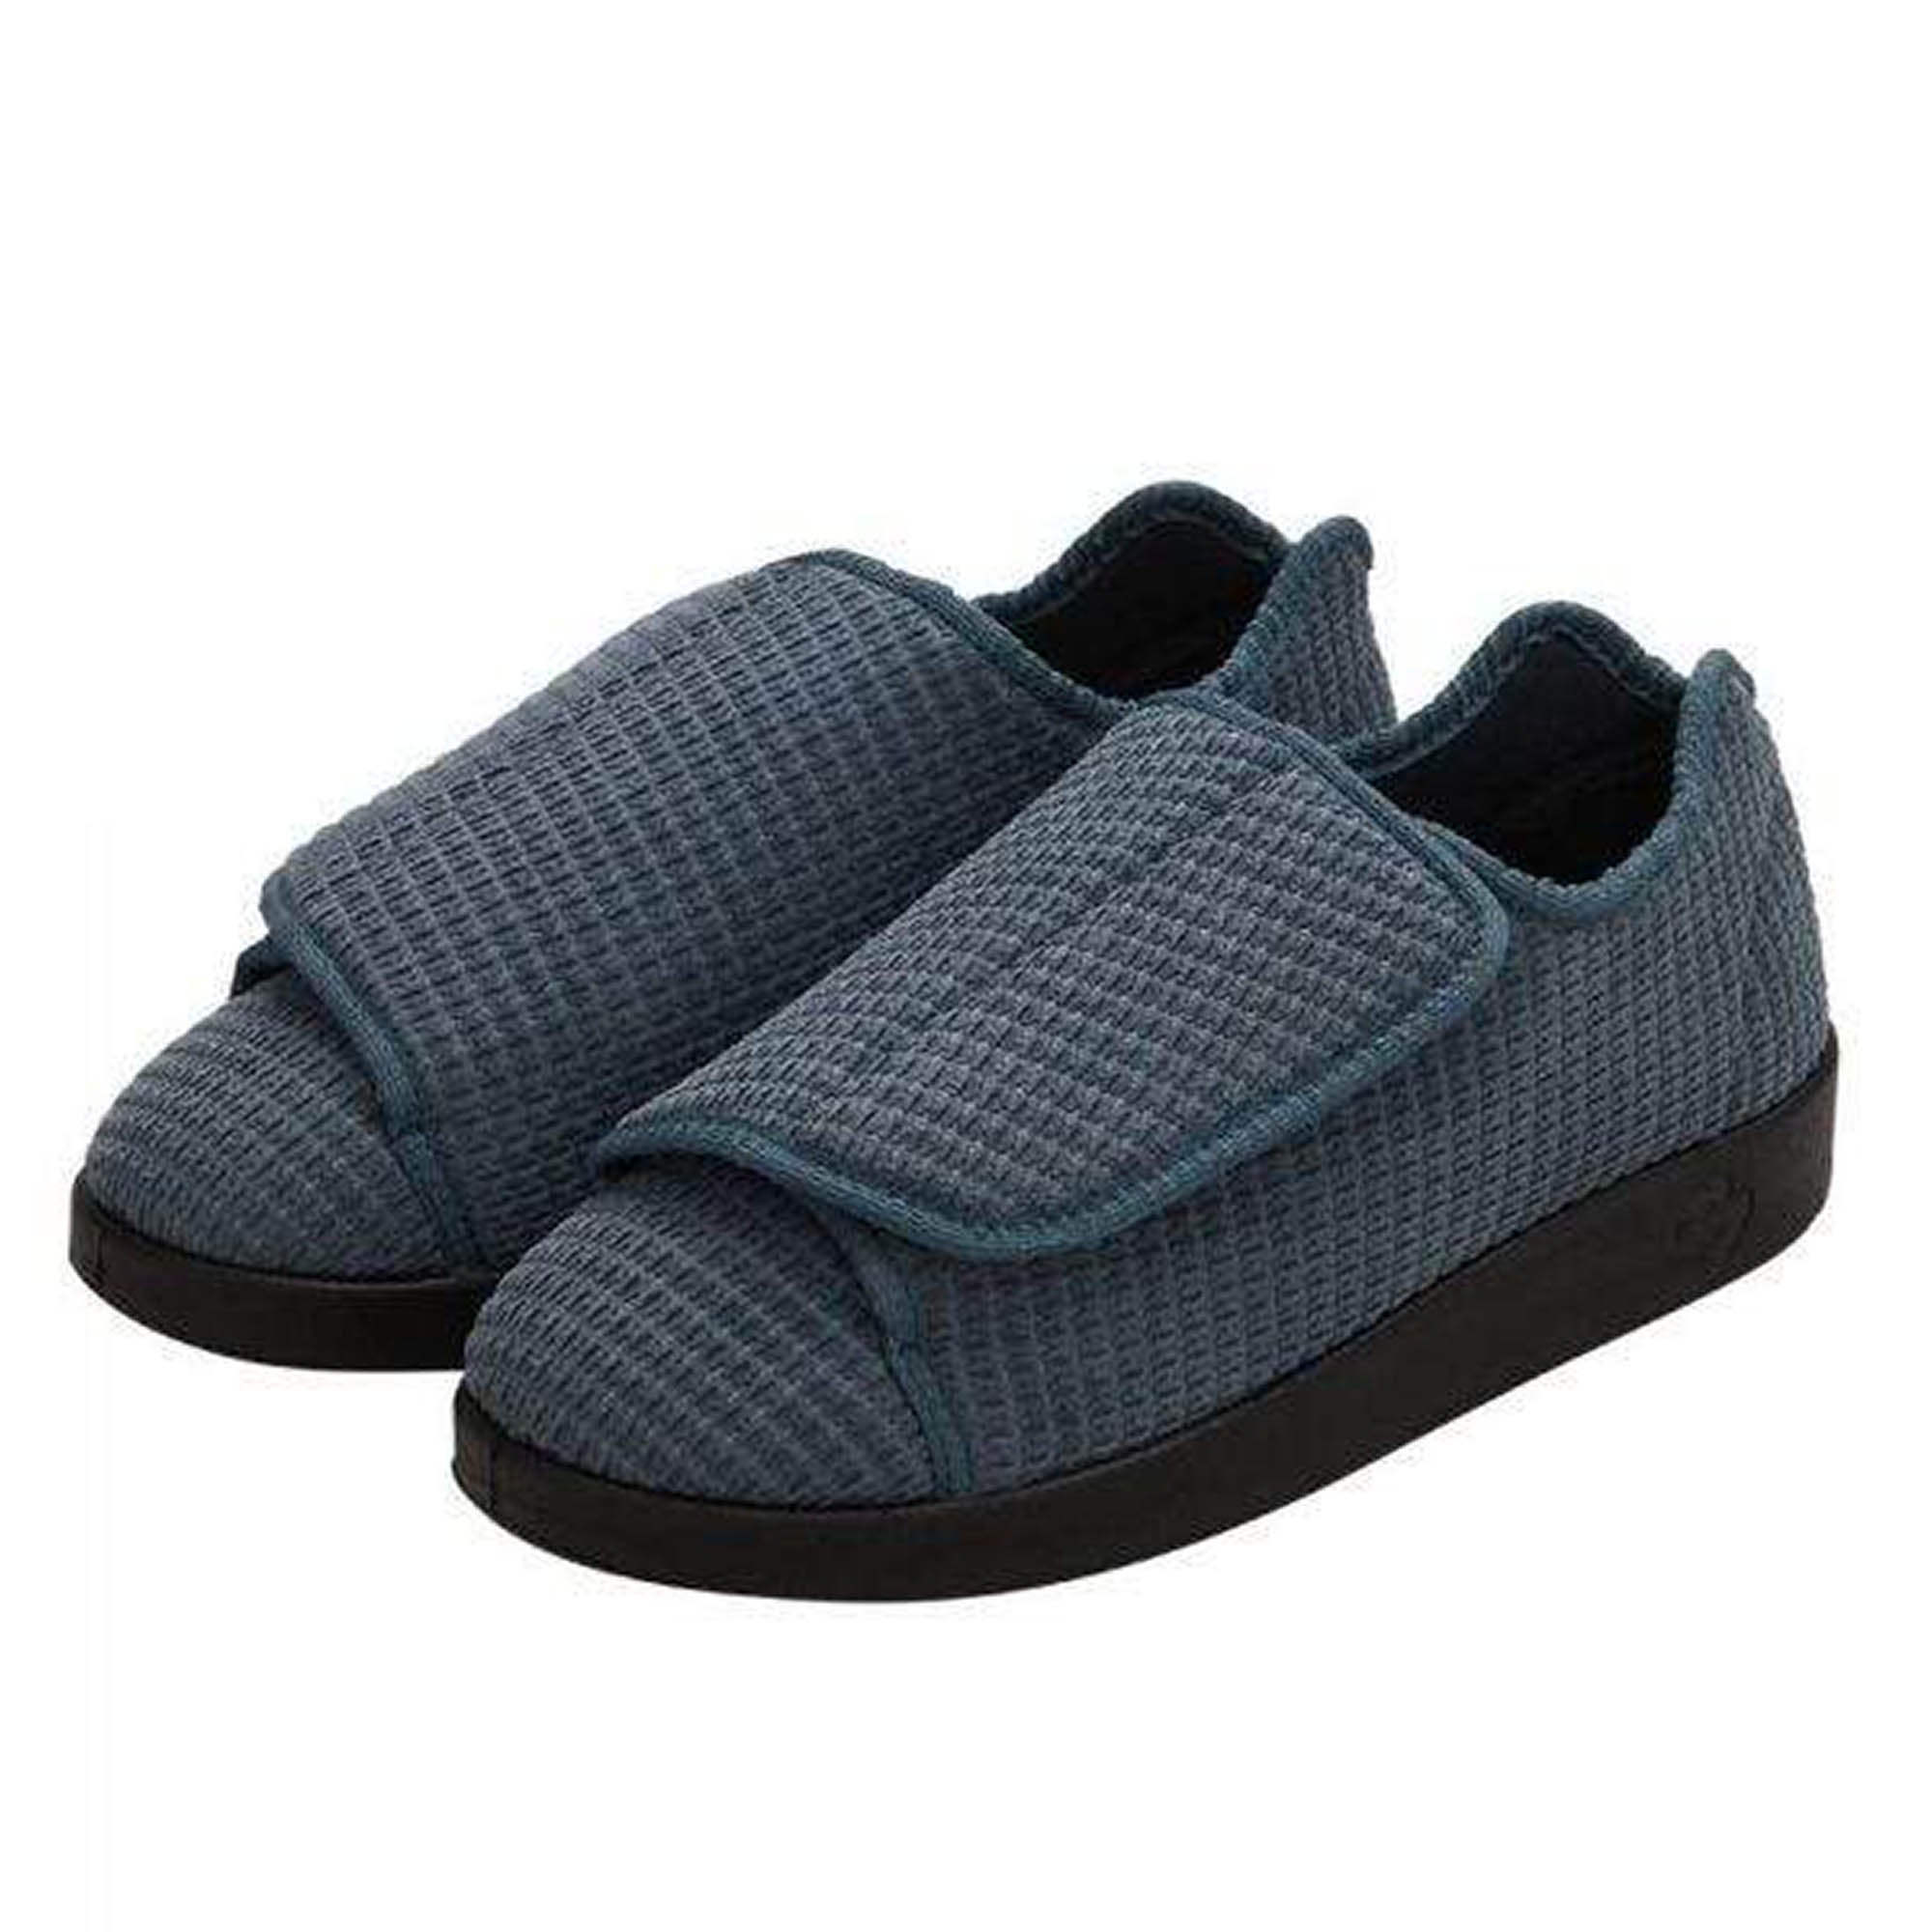 Silverts Men's Extra Extra Wide Slip-Resistant Slippers | The Veterans Site